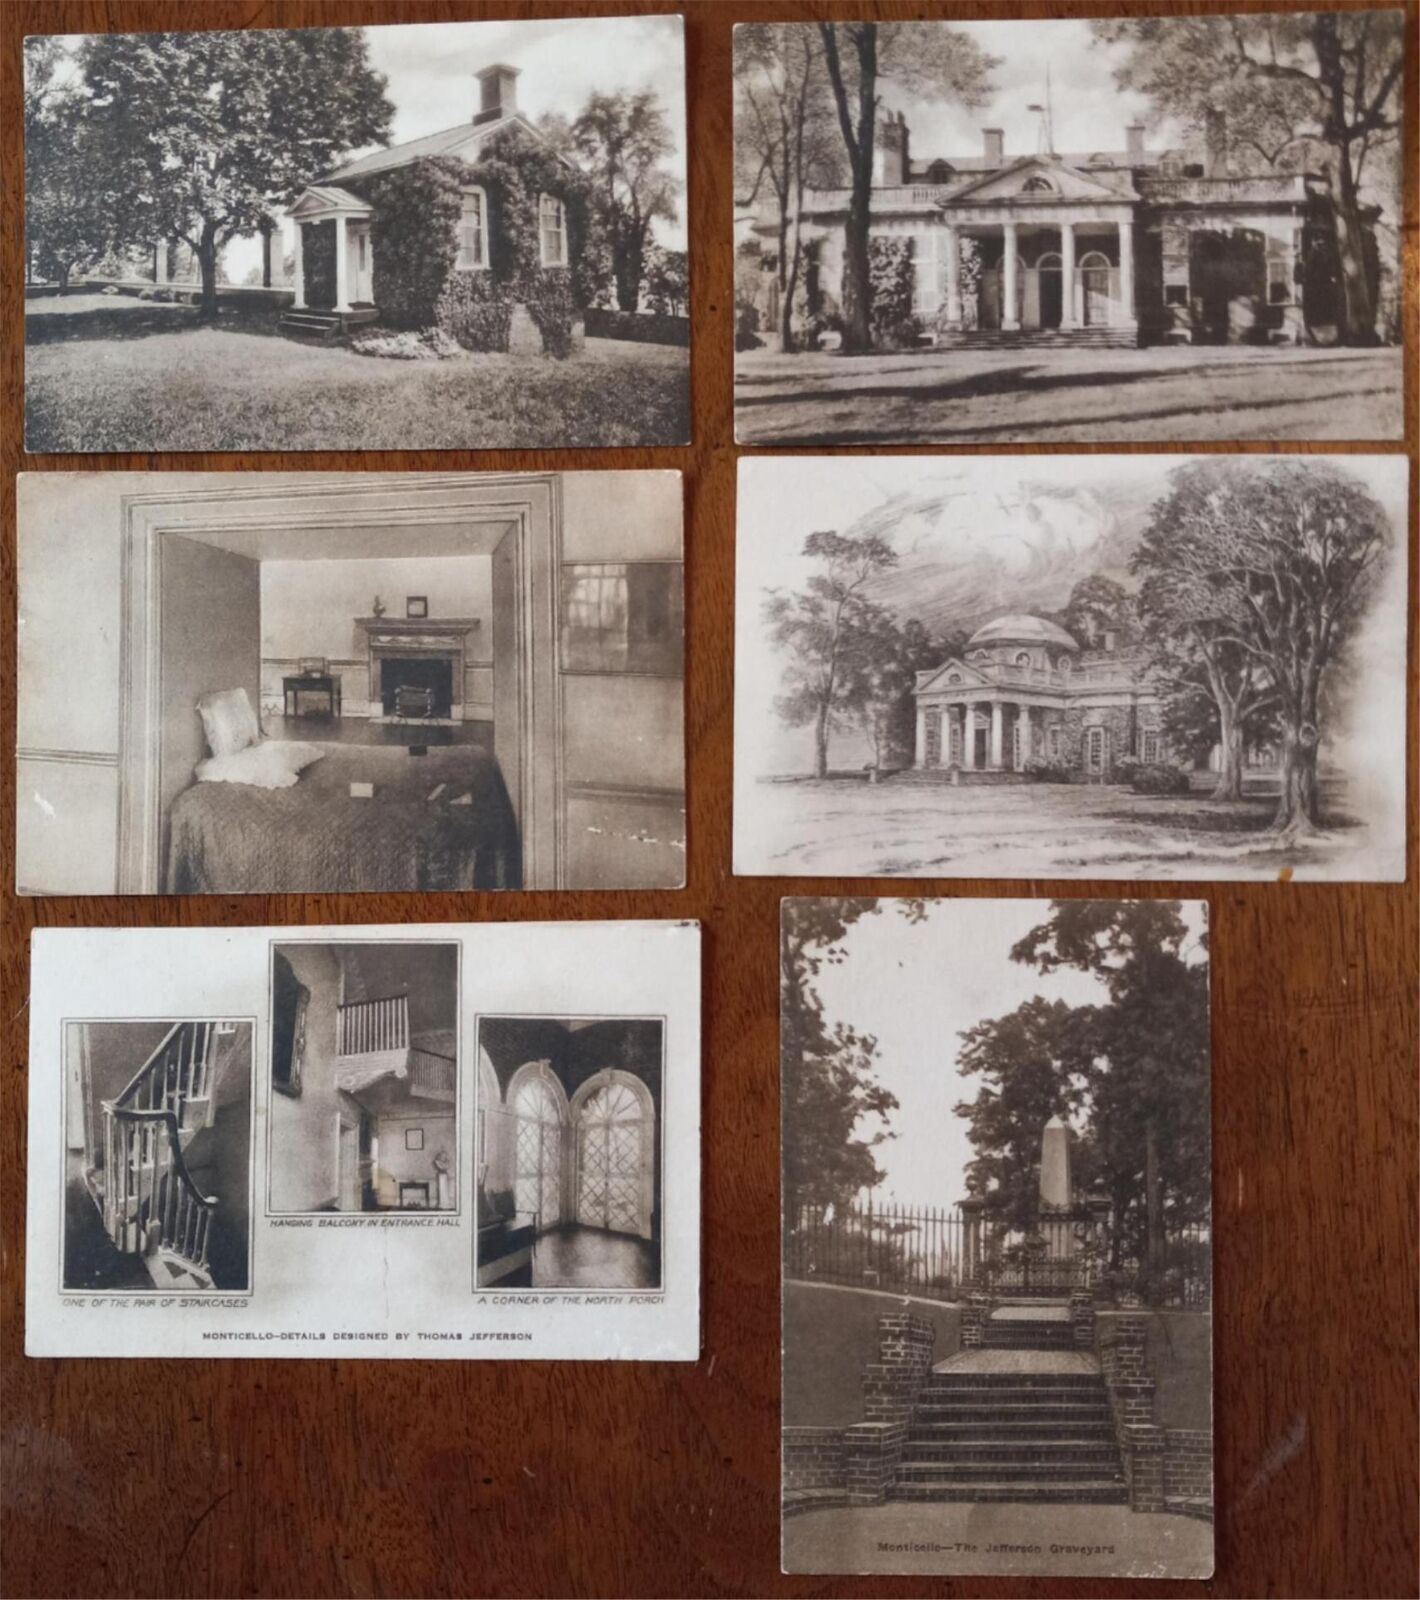 1928 MONTICELLO HOME OF THOMAS JEFFERSON LOT OF 7 DIFFERENT POSTCARDS 2247